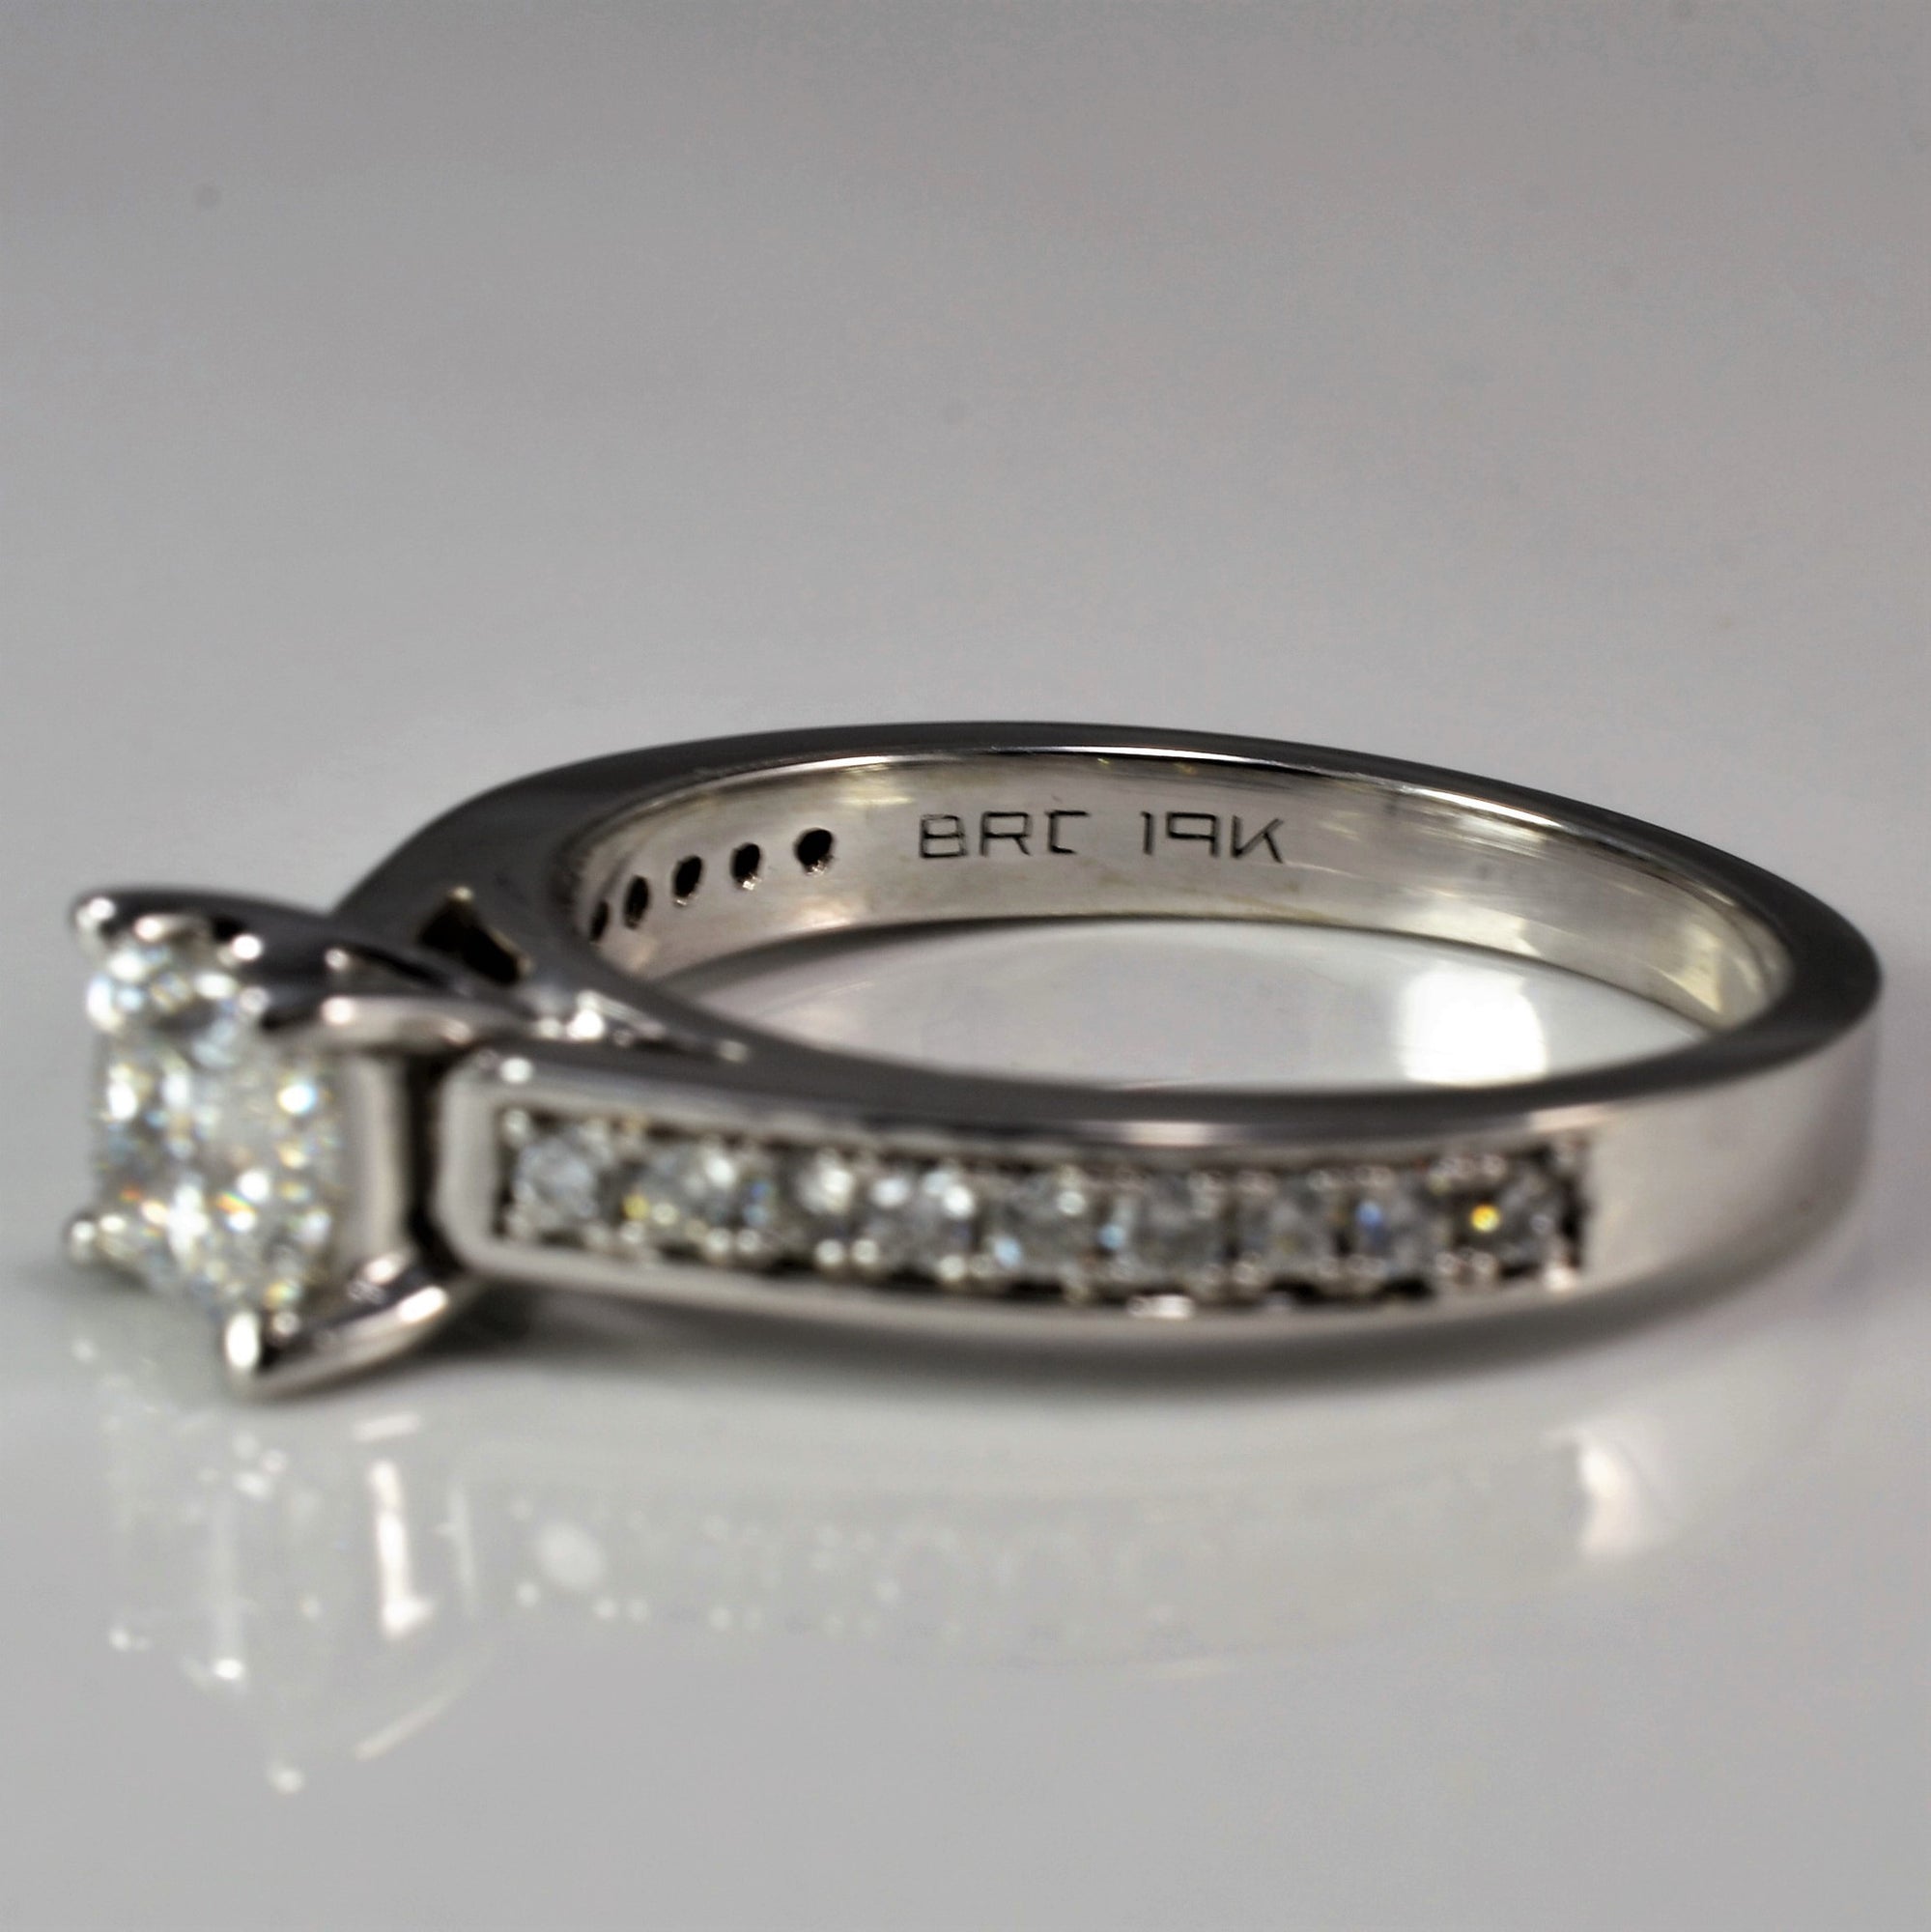 Princess Cut Engagement Ring With Accented Shank | 0.77 ctw, SZ 5.75 |